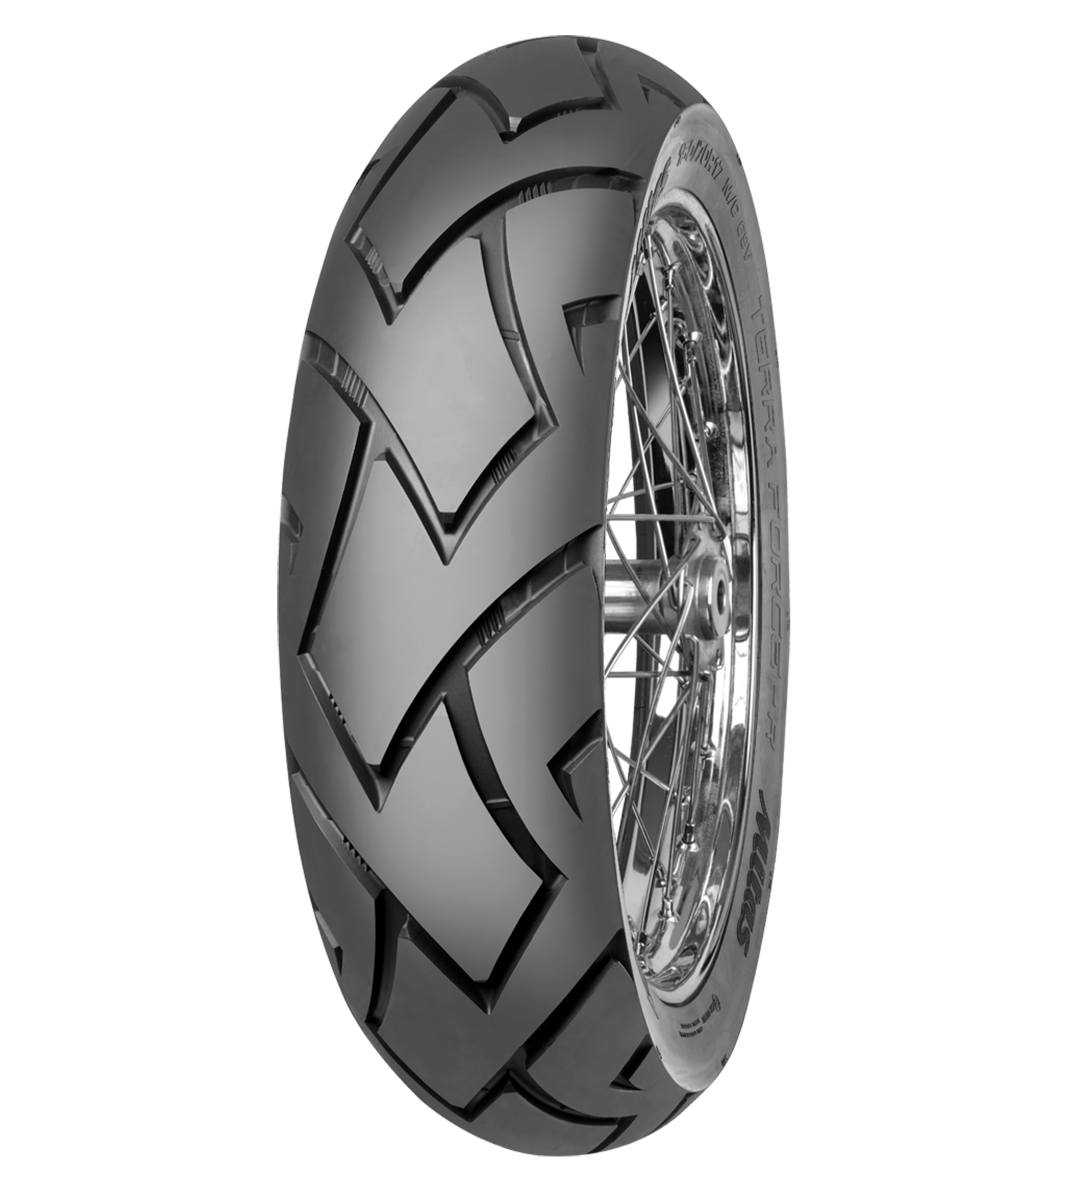 Mitas TERRA FORCE-R 170/60ZR17 Trail ON Trail 72W No Stripe Tubeless Rear Tire, 567778, 170/60ZR17, Adventure Touring, Rear, Terra Force, Terra Force-R, Trail, Trail ON, Tires - Imported and distributed in North & South America by Lindeco Genuine Powersports - Premier Powersports Equipment and Accessories for Motorcycle Enthusiasts, Professional Riders and Dealers.